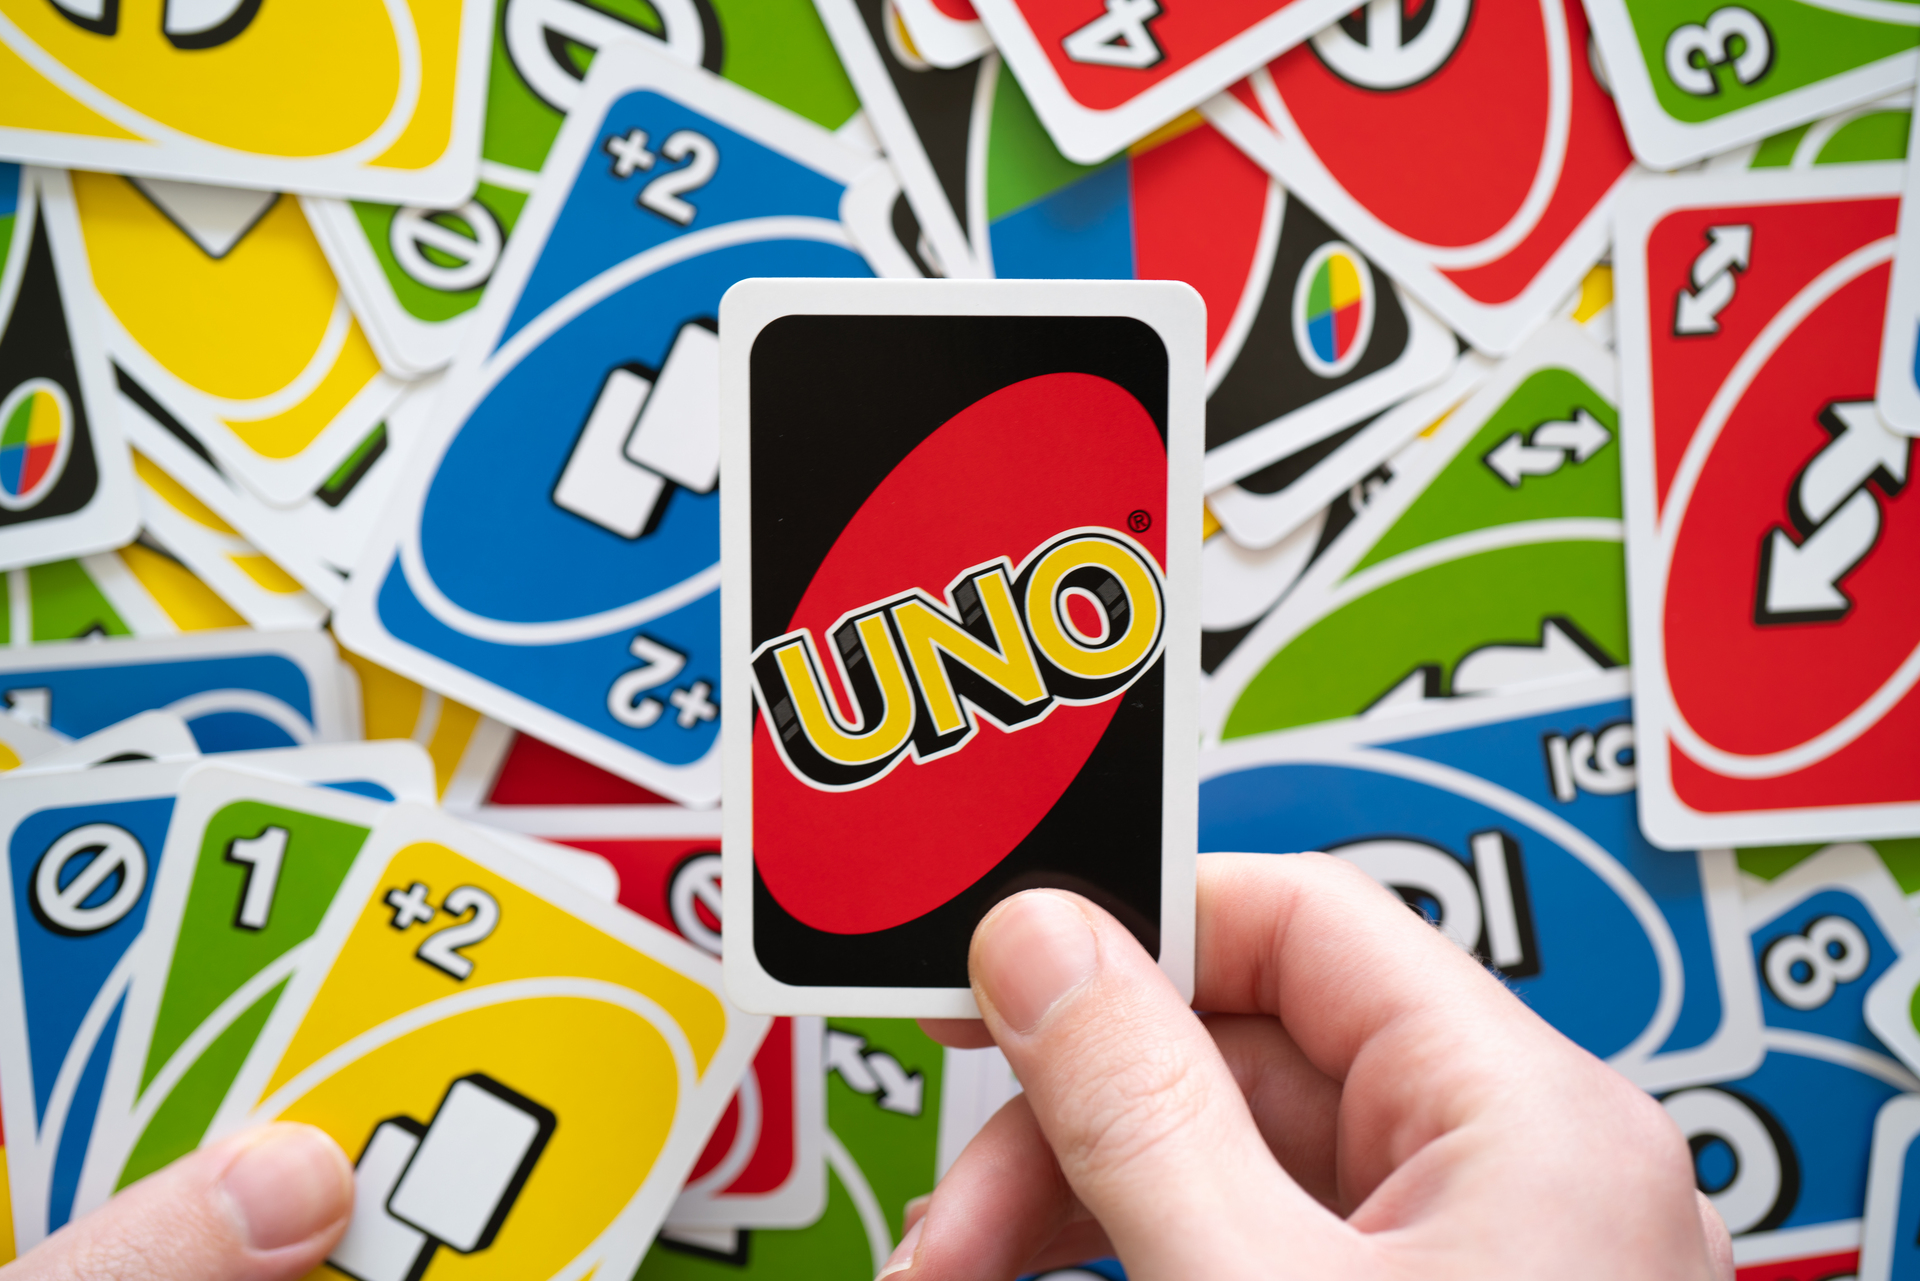 Image of UNO cards on a table with a hand holding one card